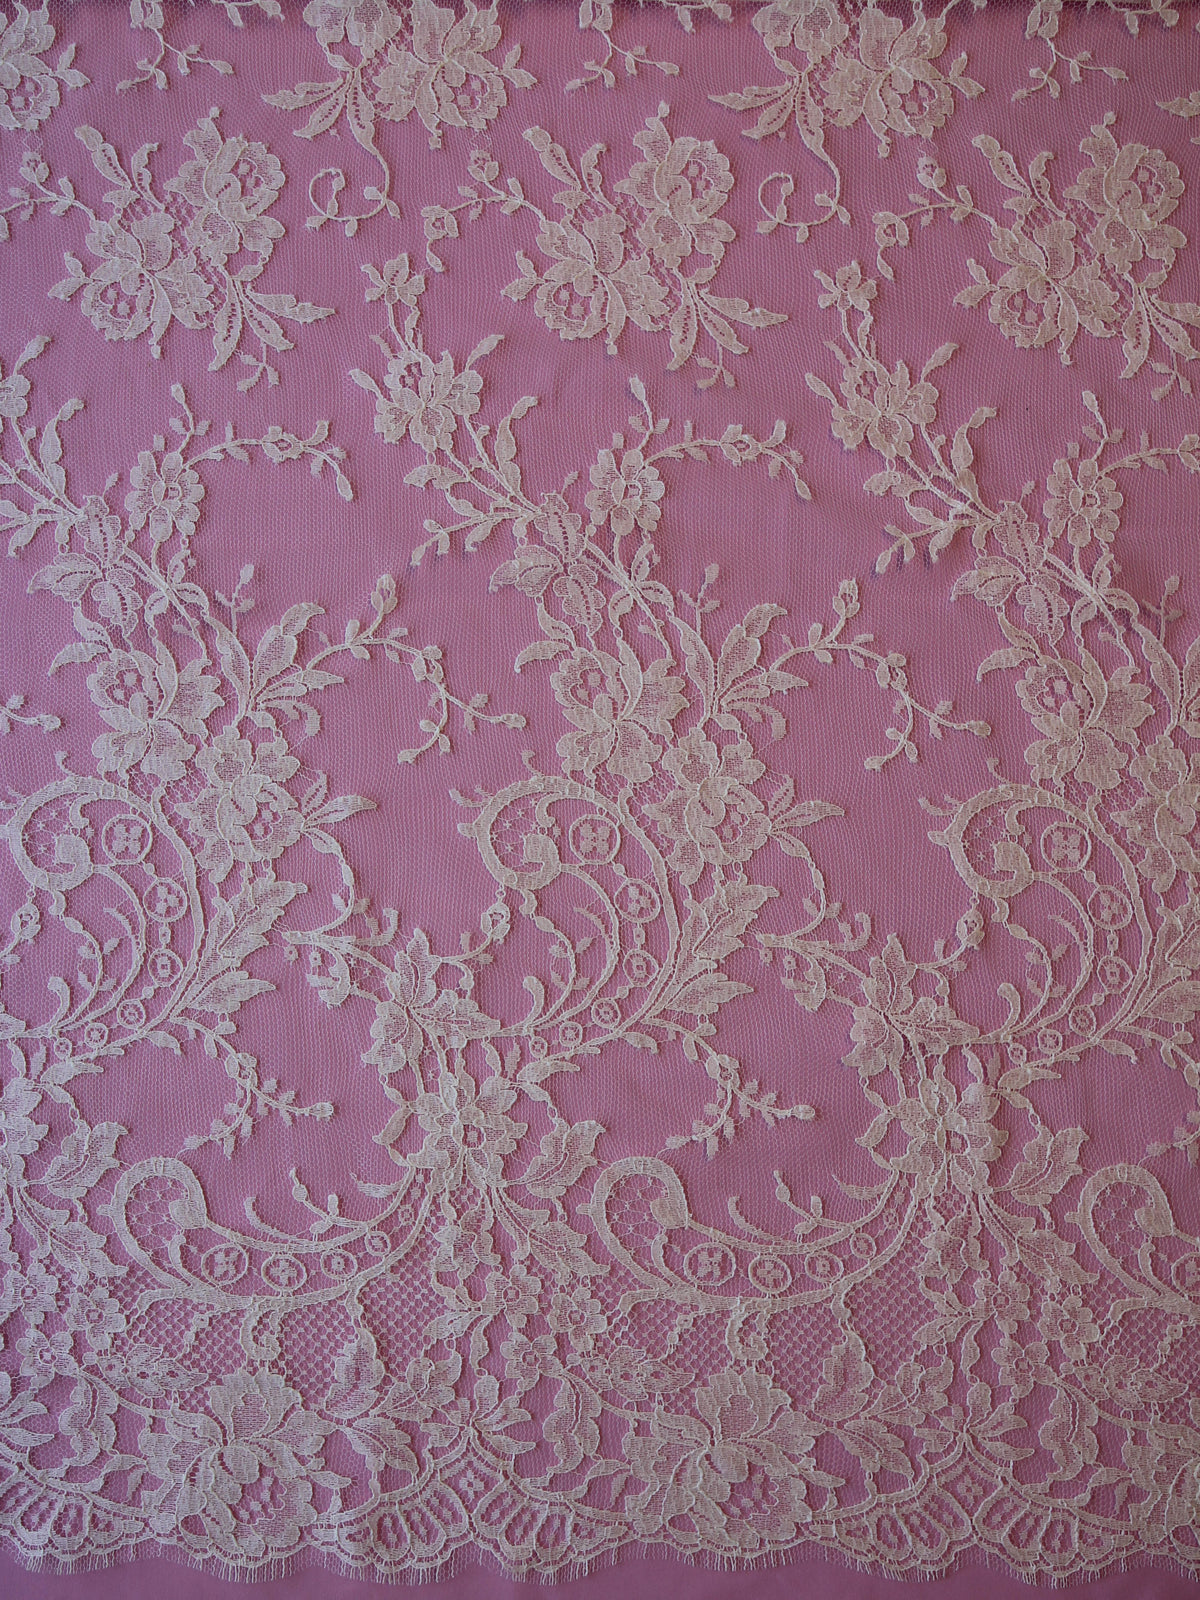 Pale Ivory Chantilly Lace - Ditzy